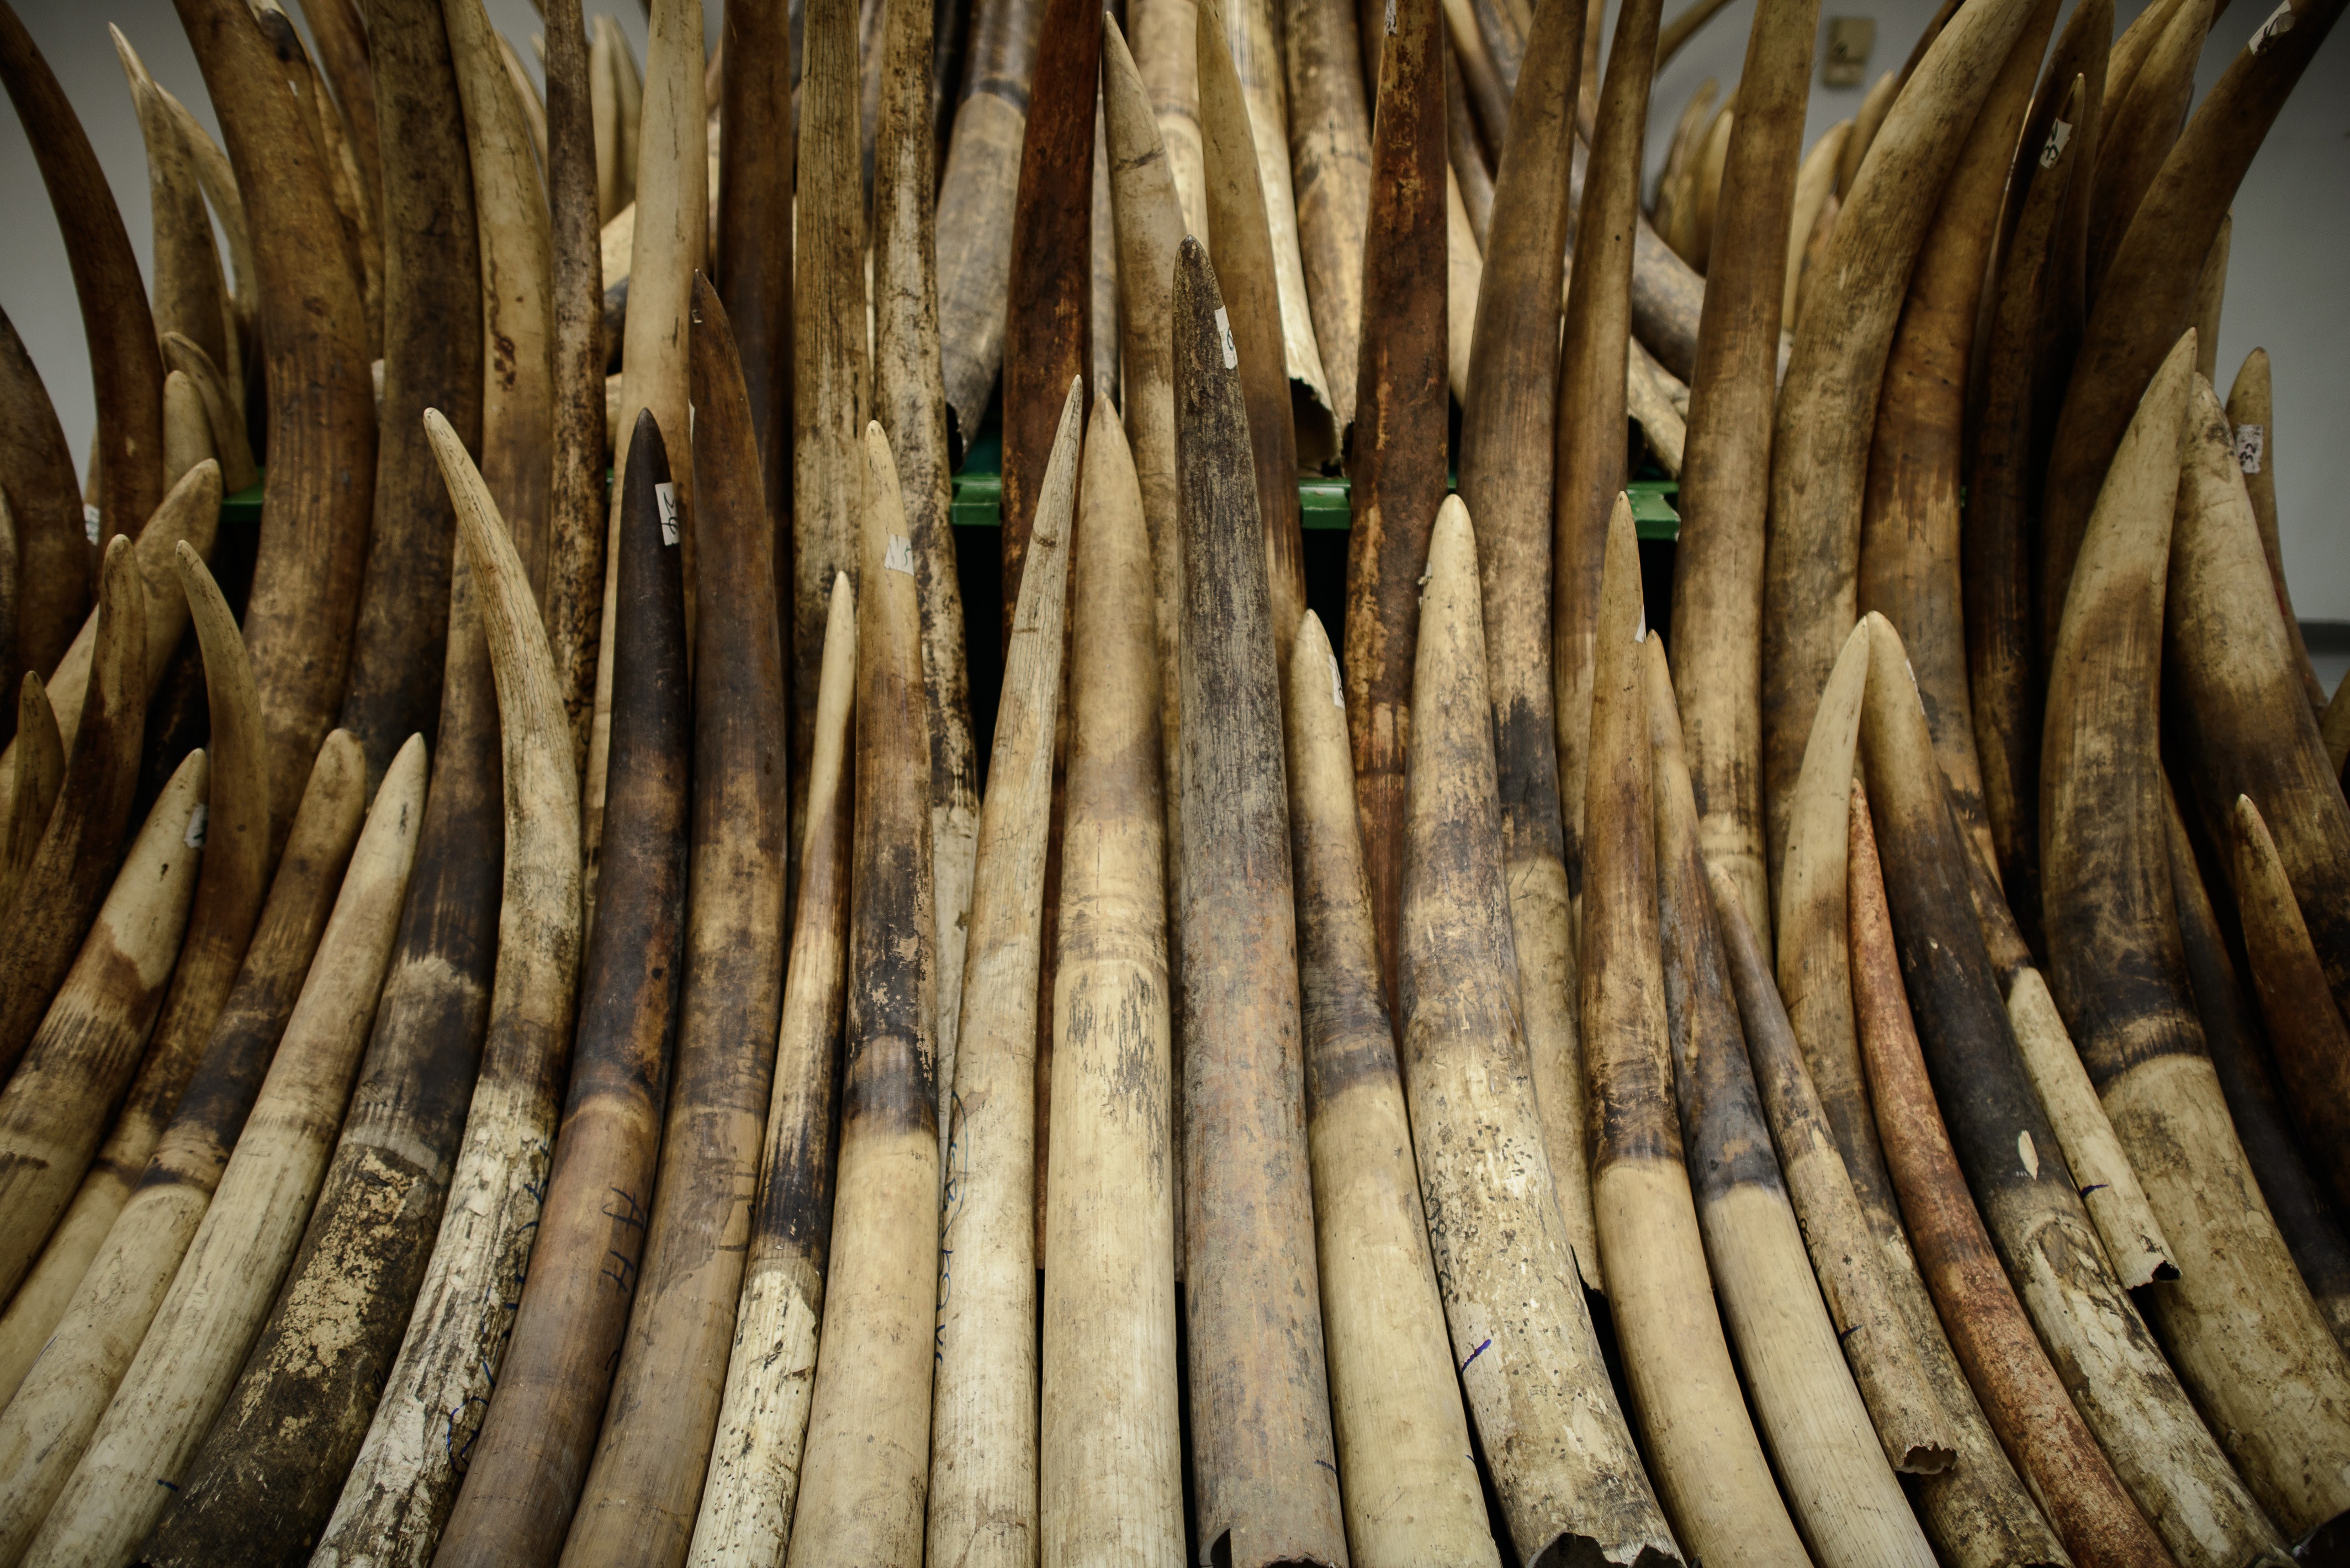 Seized ivory tusks are displayed prior to their destruction by incineration in Hong Kong on May 15, 2014 (Philippe Lopez—AFP/Getty Images)